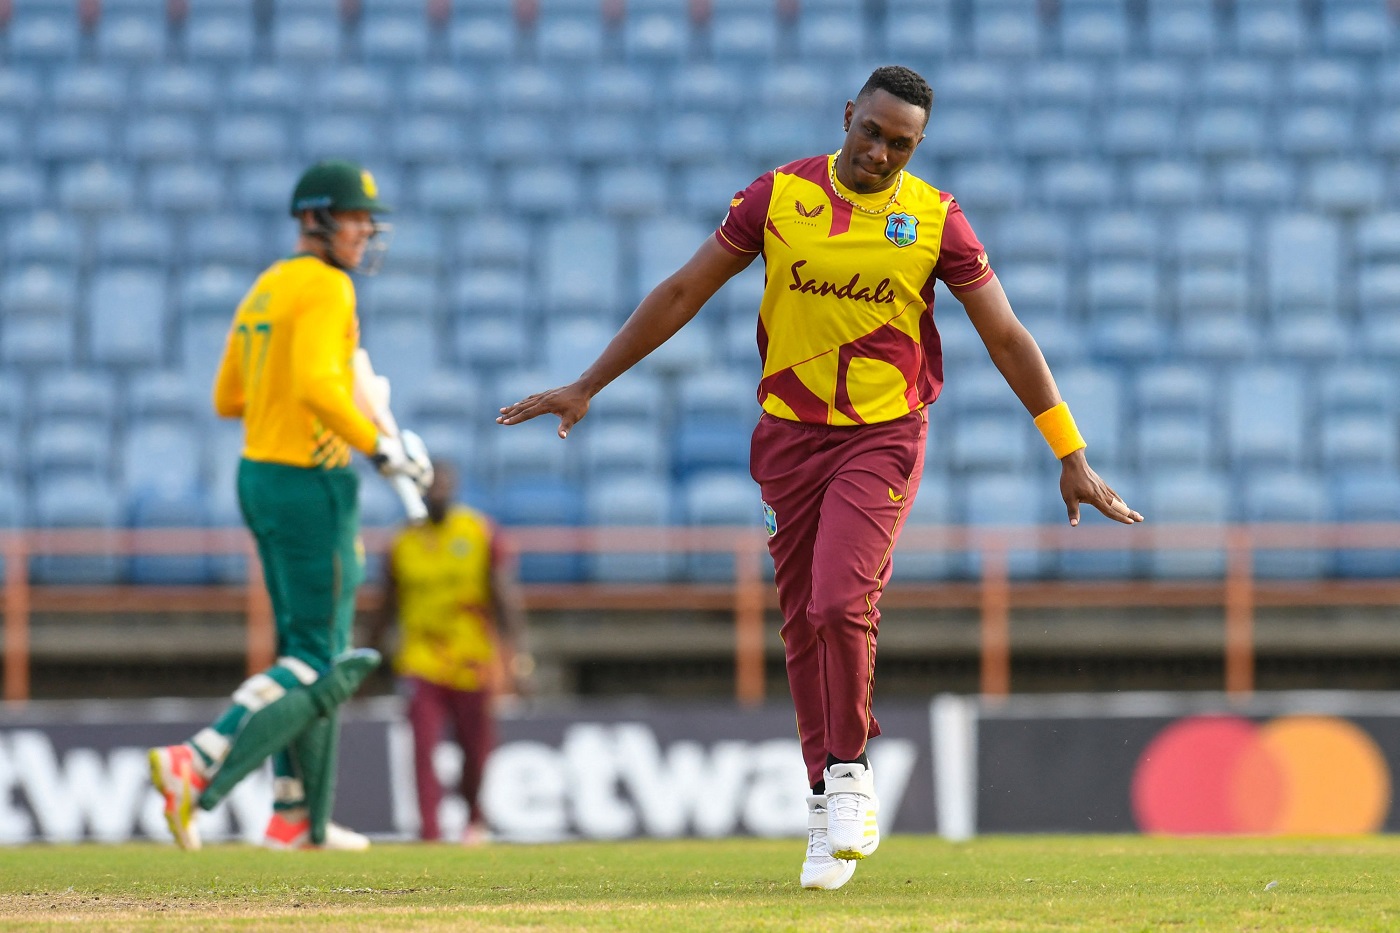 “Didn’t Know Stuart Broad Turned Comedian” – Dwayne Bravo Takes A Jibe At England Pacer